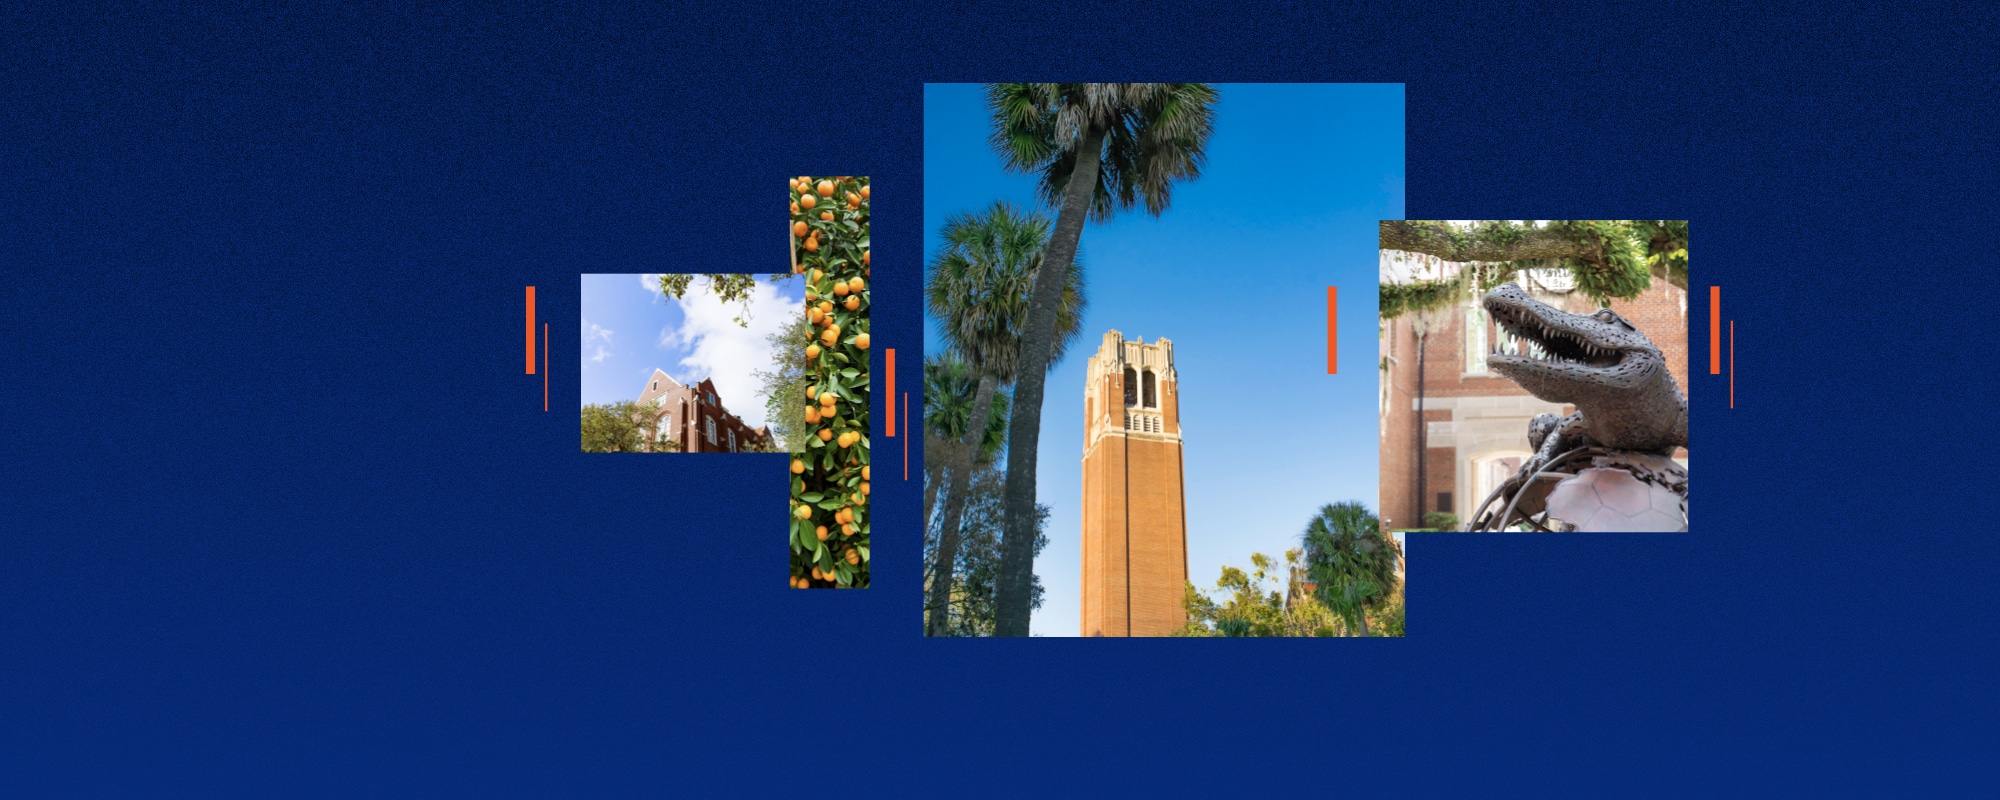 Blue background with images of a large tower, bronze gator statue and campus imagery